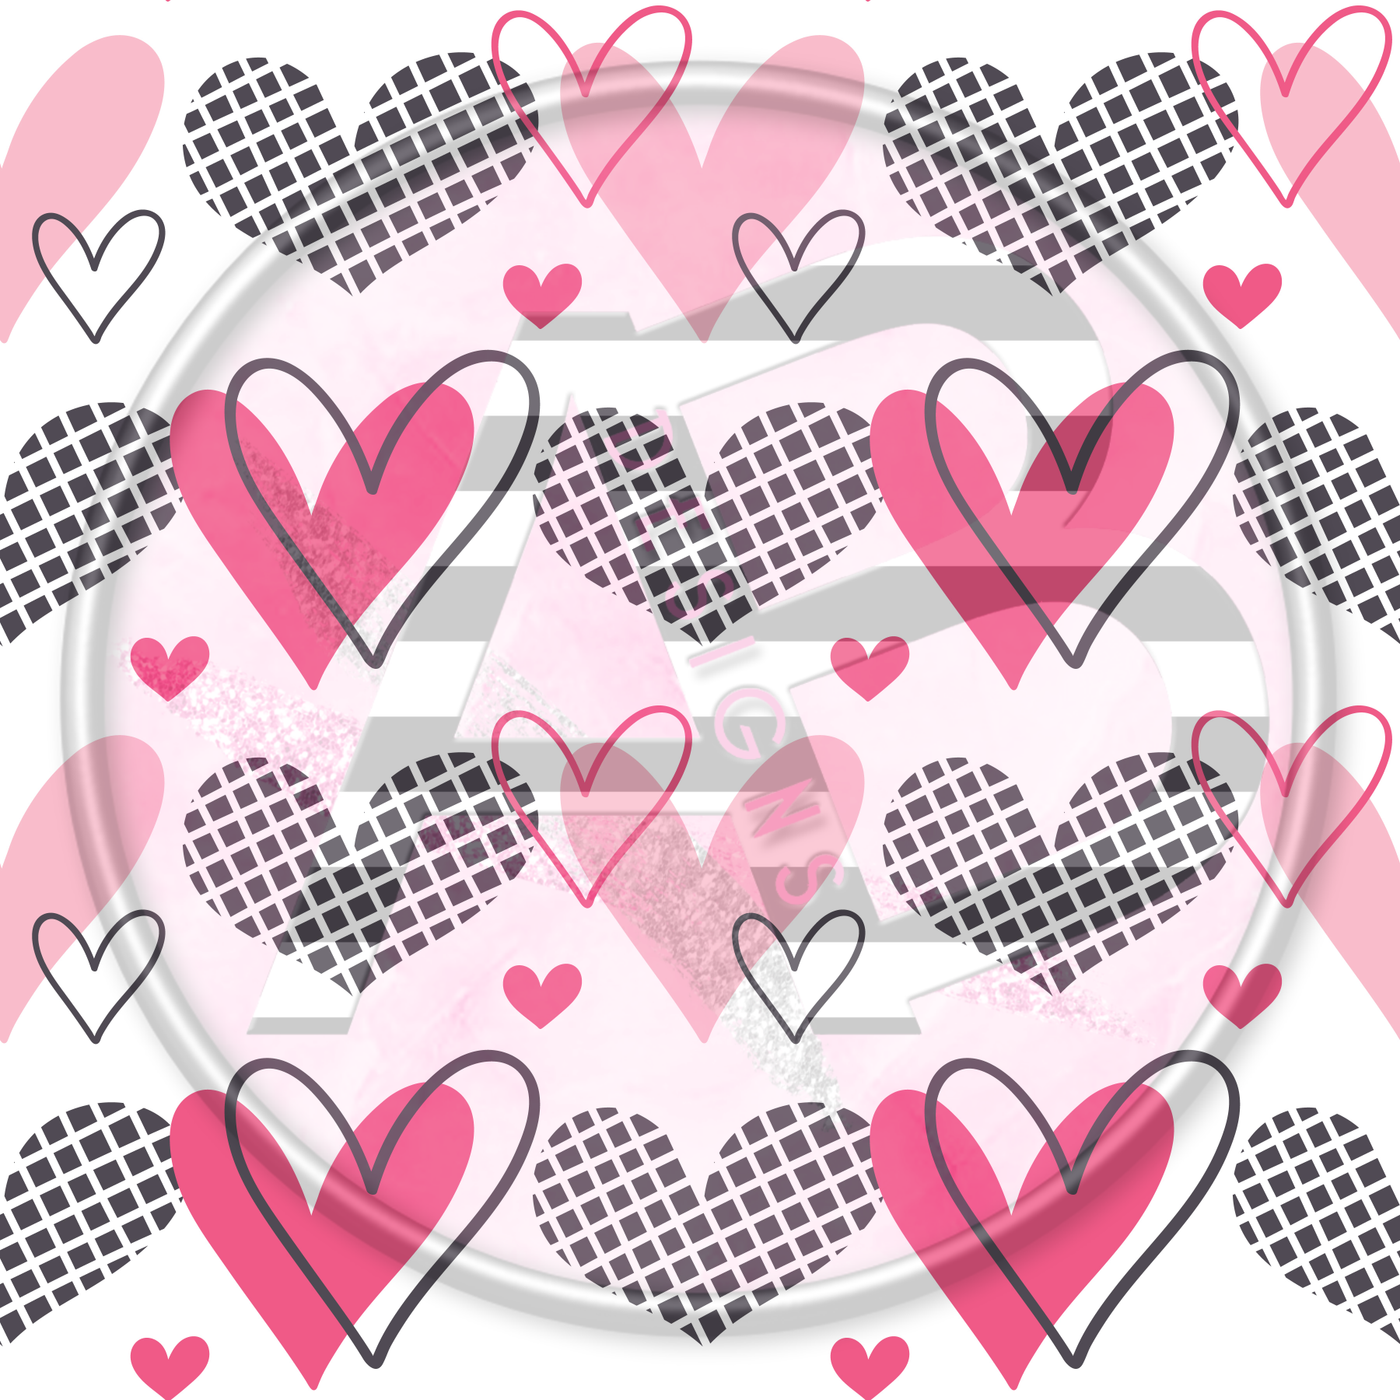 Adhesive Patterned Vinyl - Hearts 7